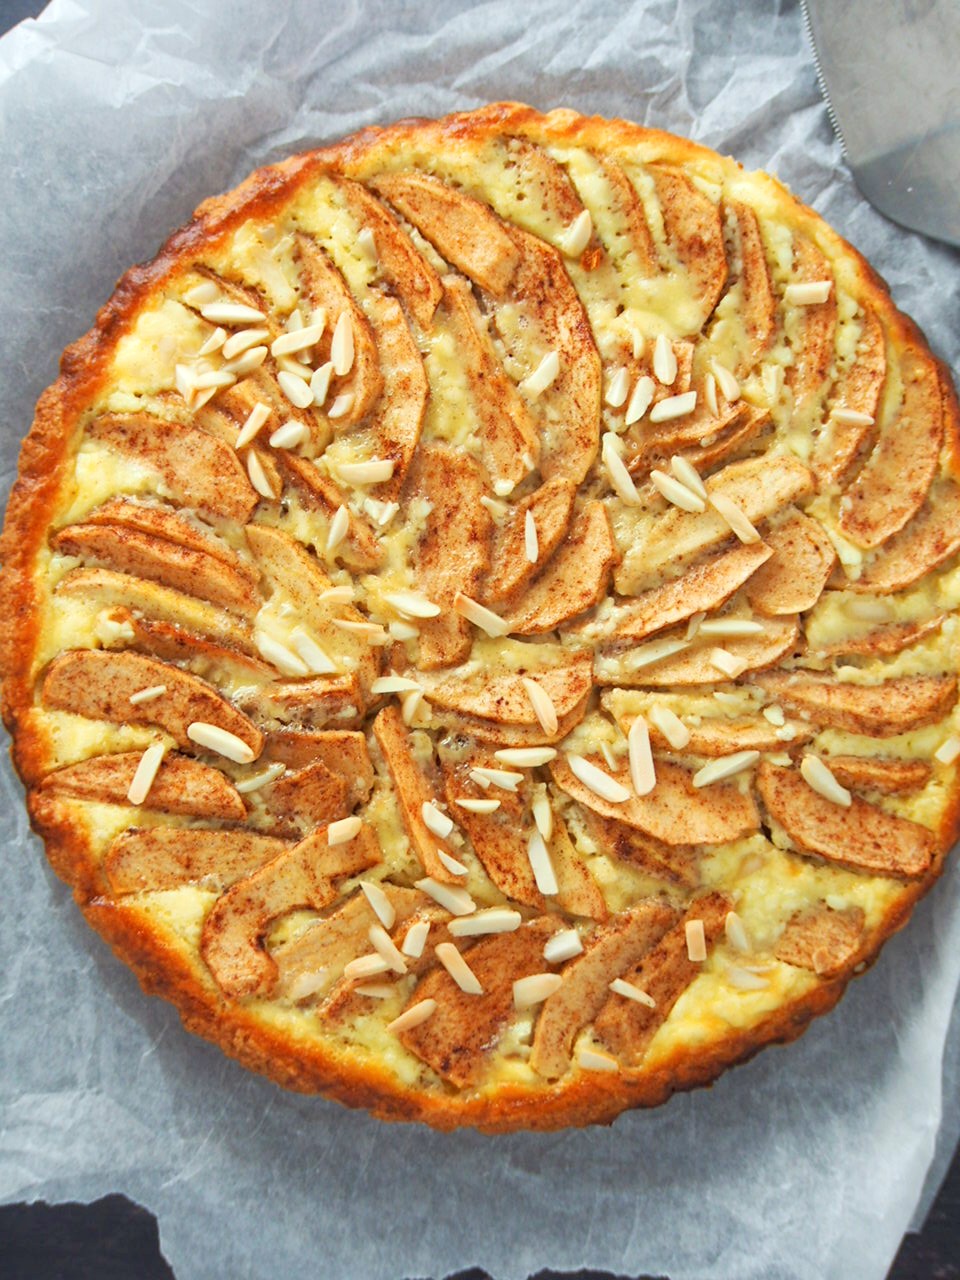 Top view of the whole apple tart.